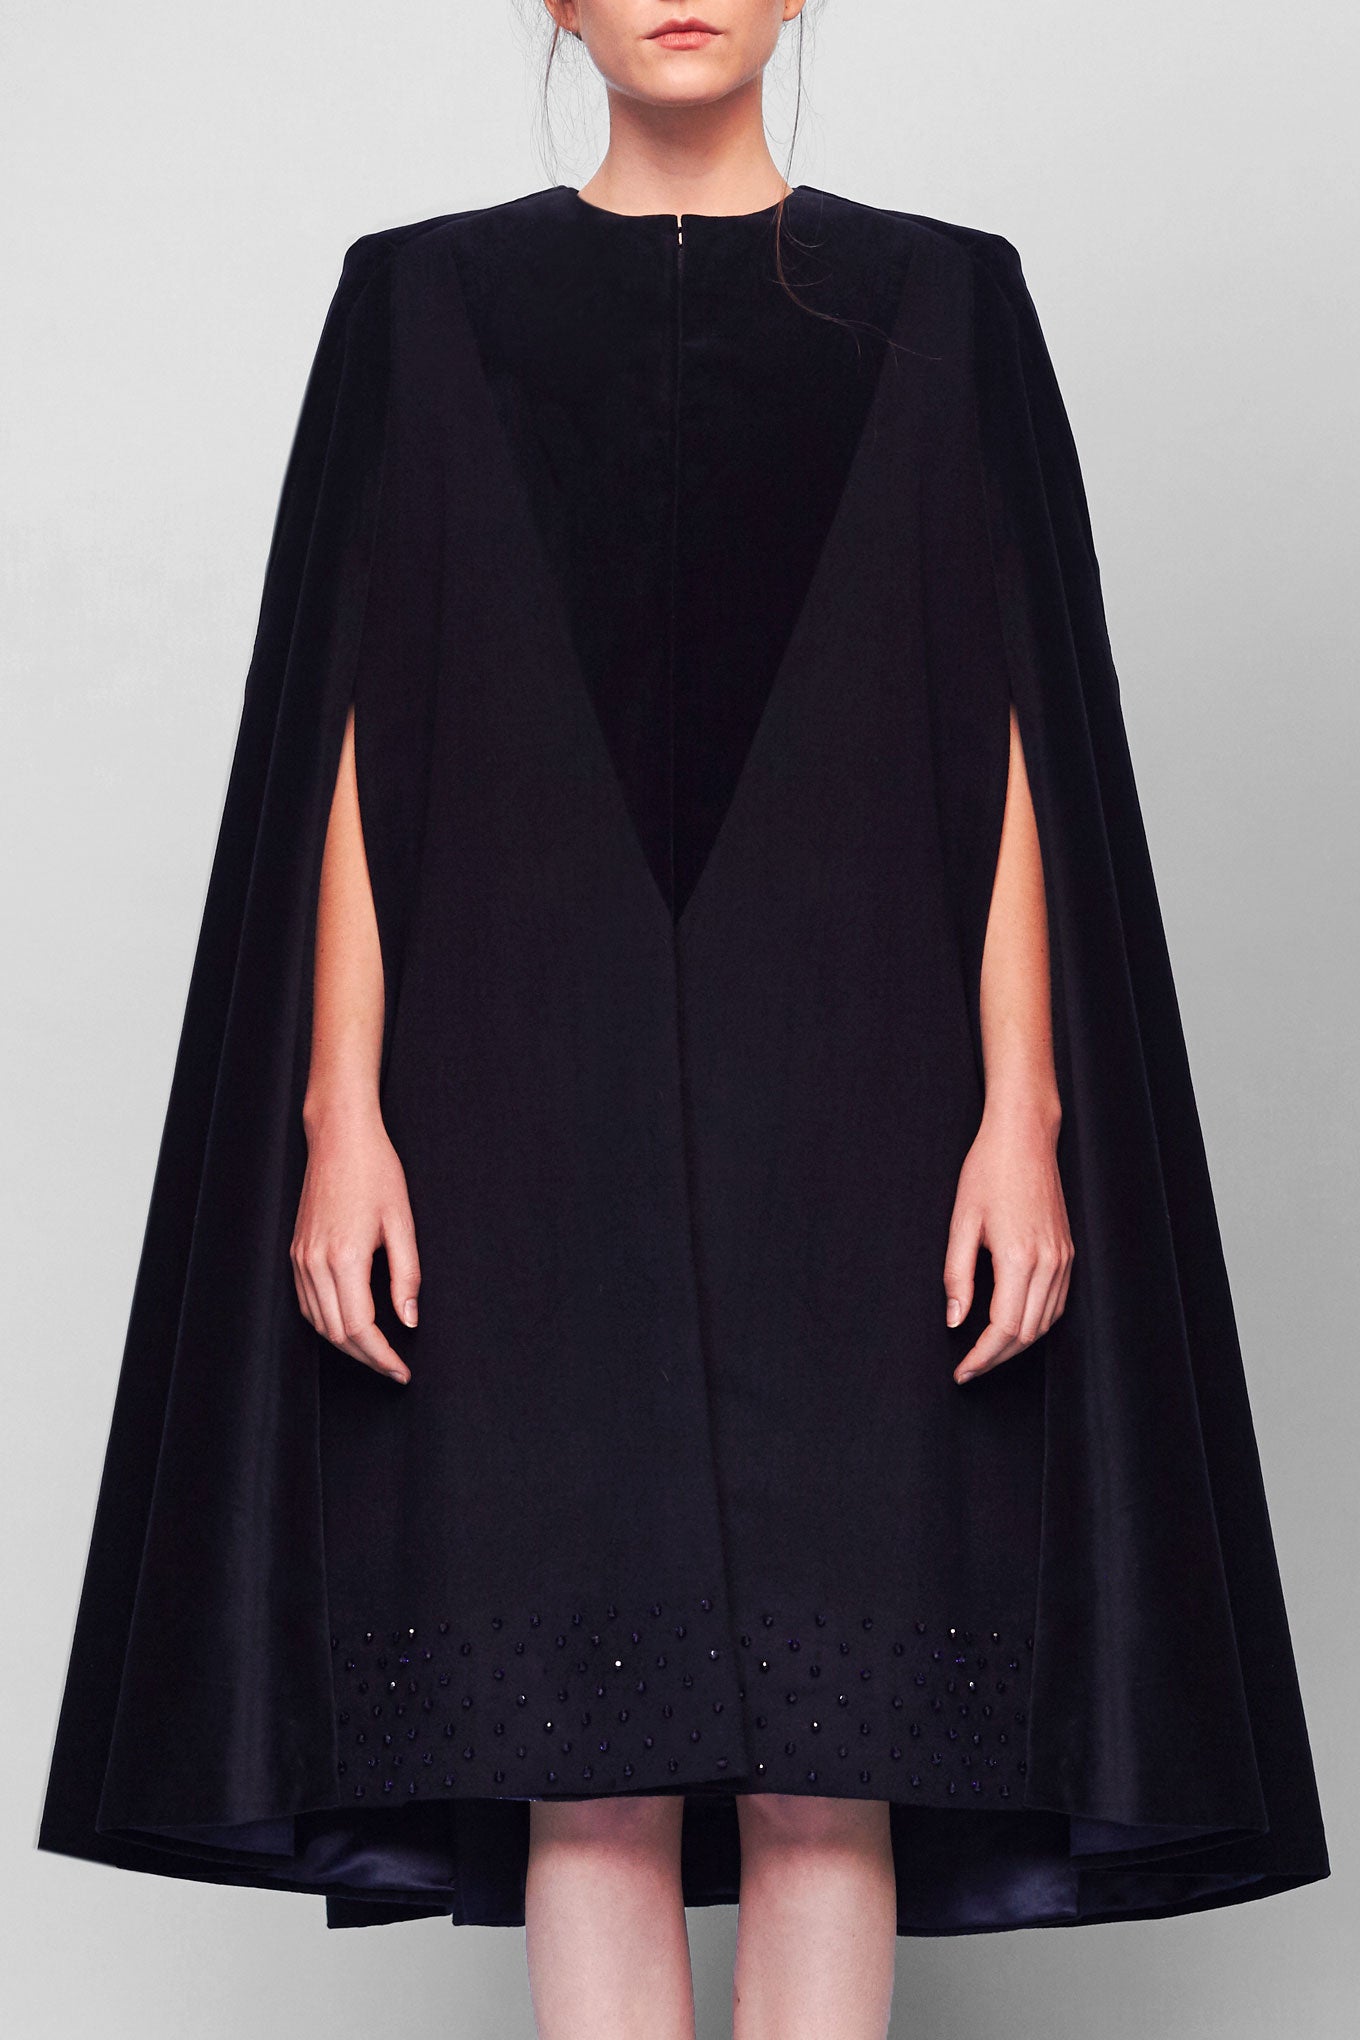 VILMA embroidered wool cape - Navy